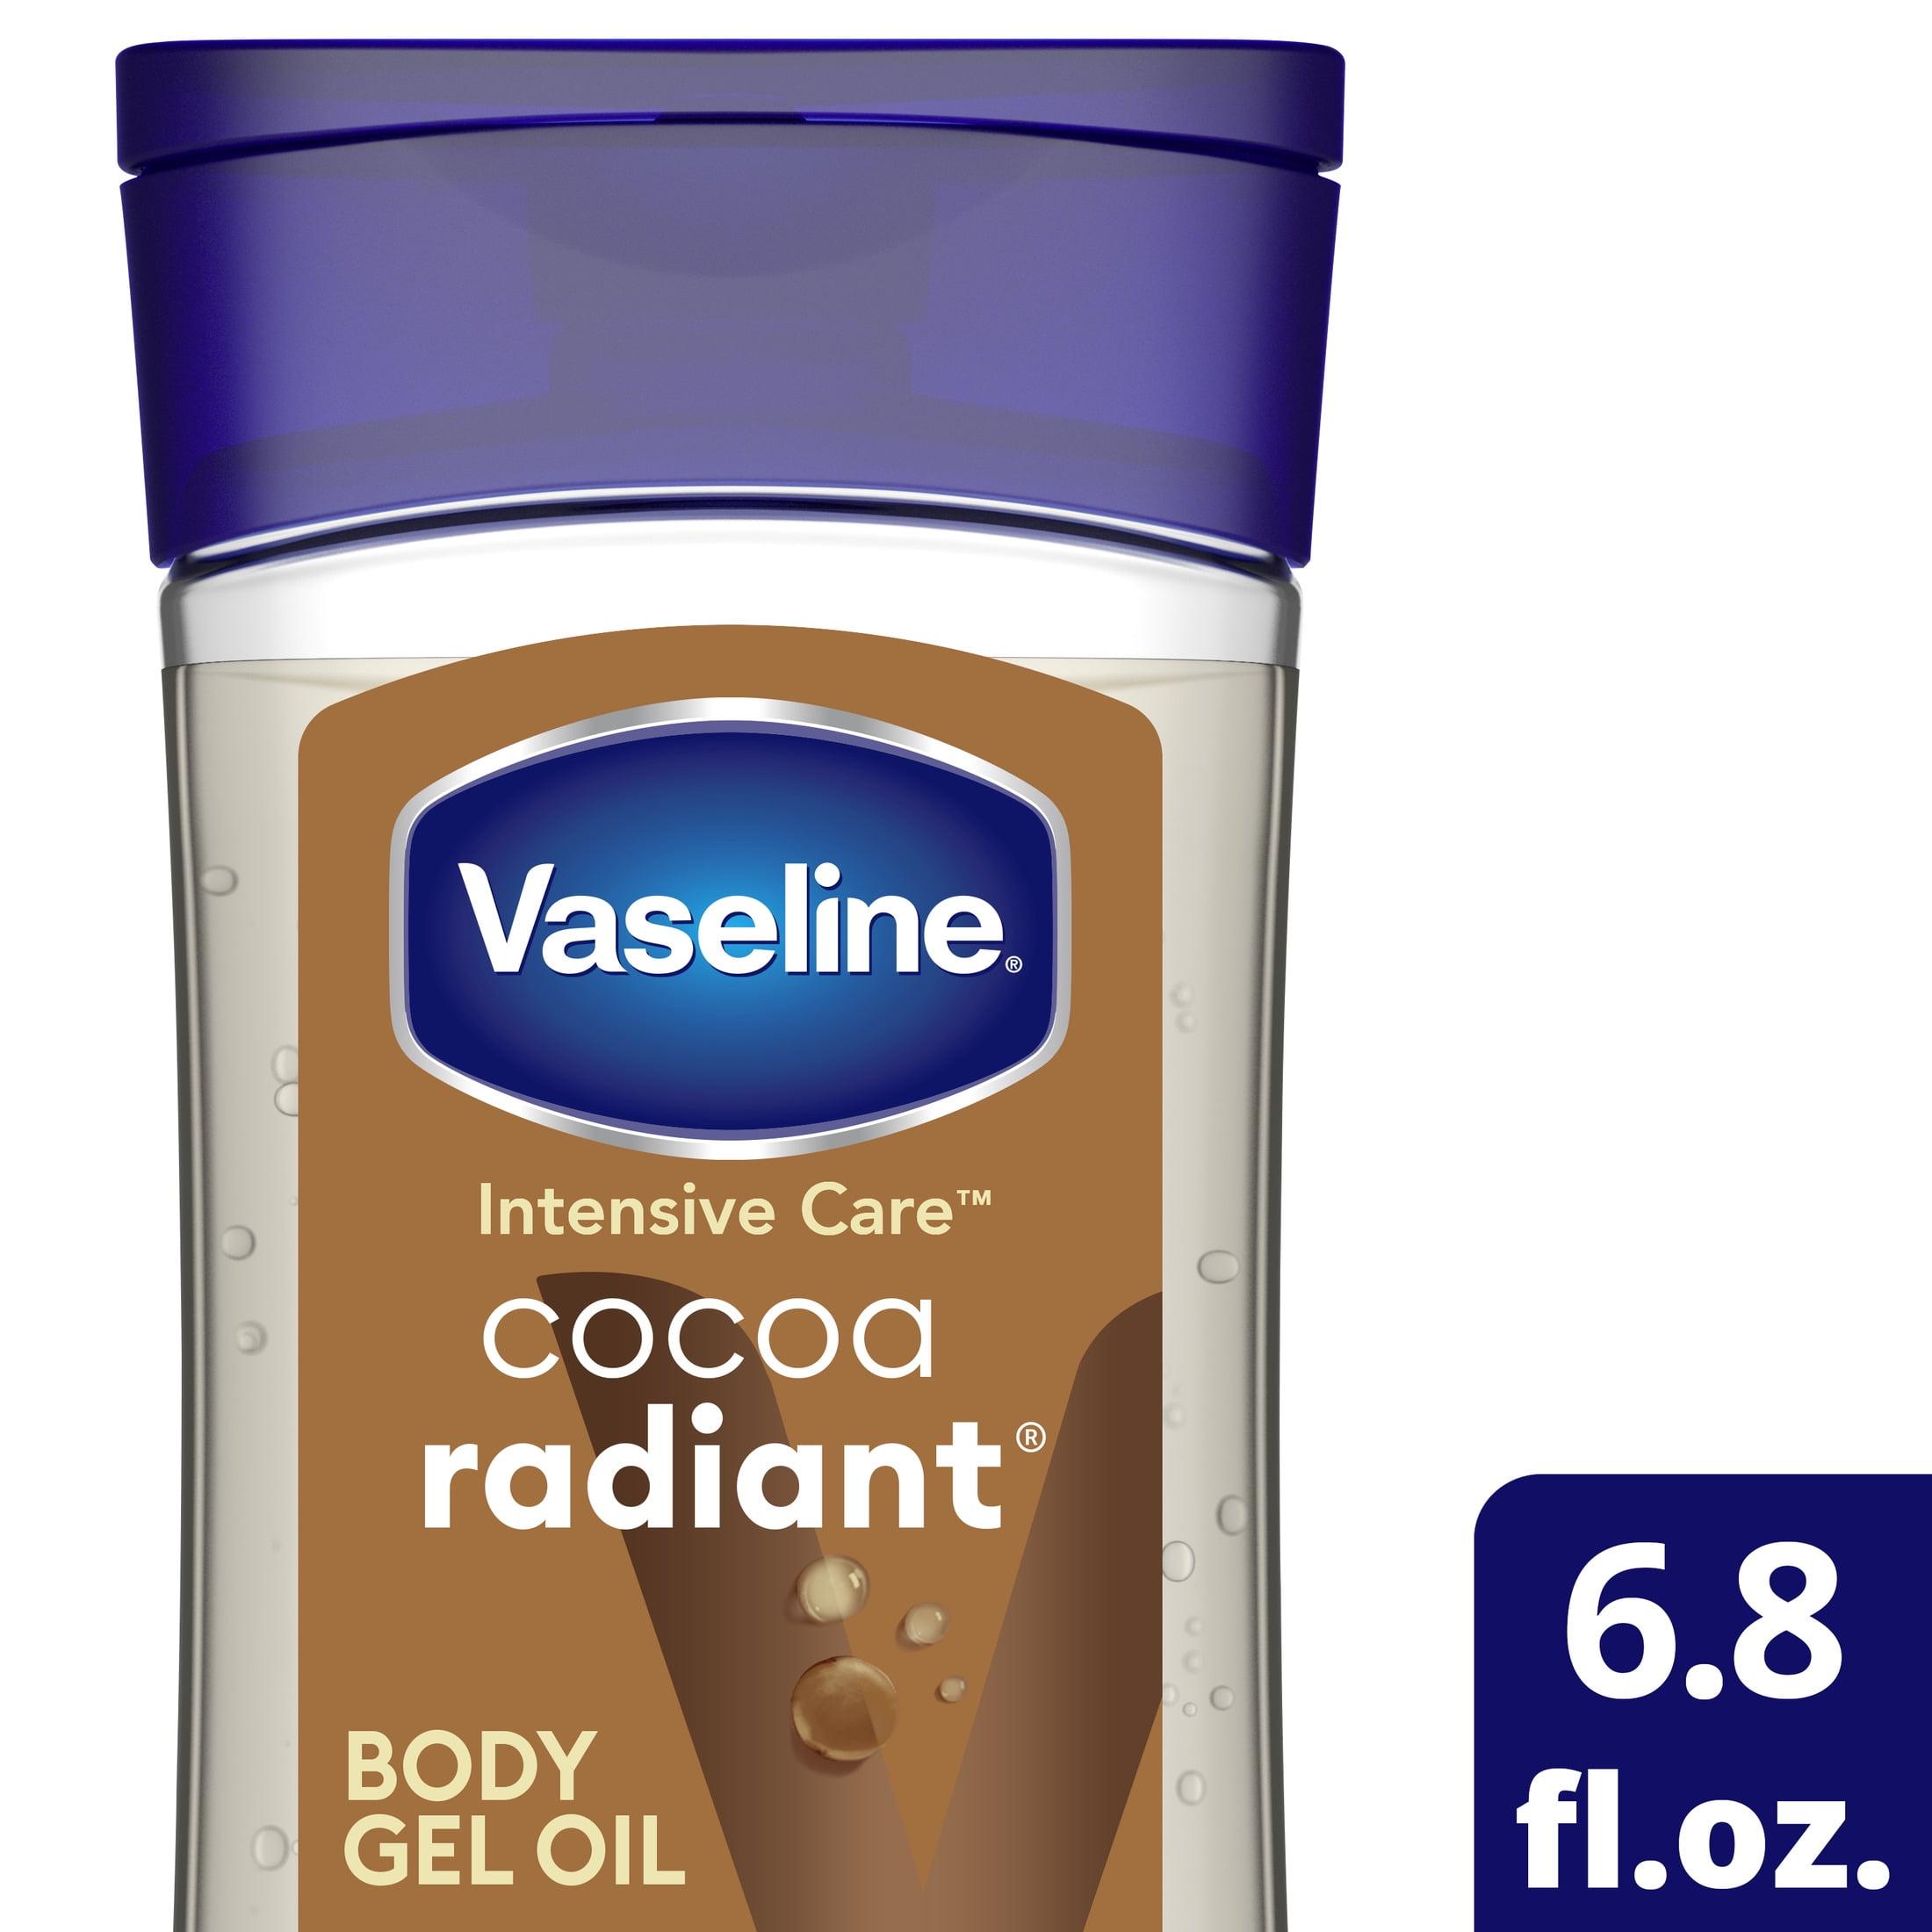 Vaseline Intensive Care Radiant Body Oil Gel with Cocoa Butter for Dry Skin, 6.8 fl oz - image 3 of 11